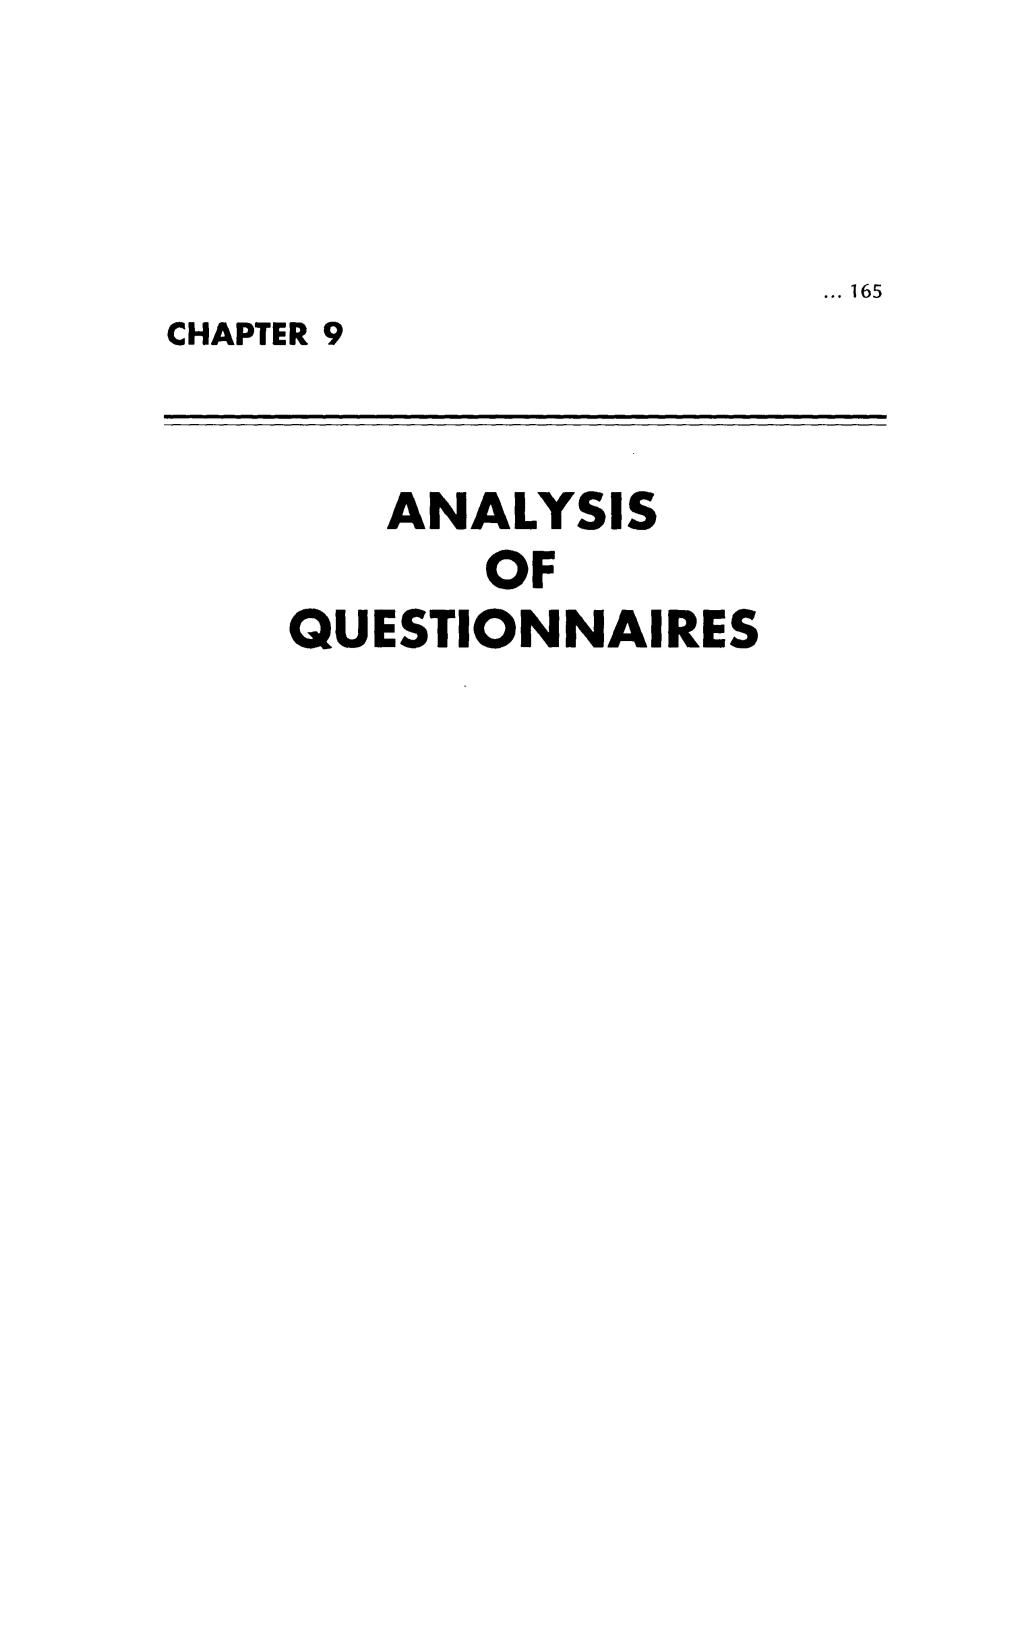 Analysis of Questionnaires